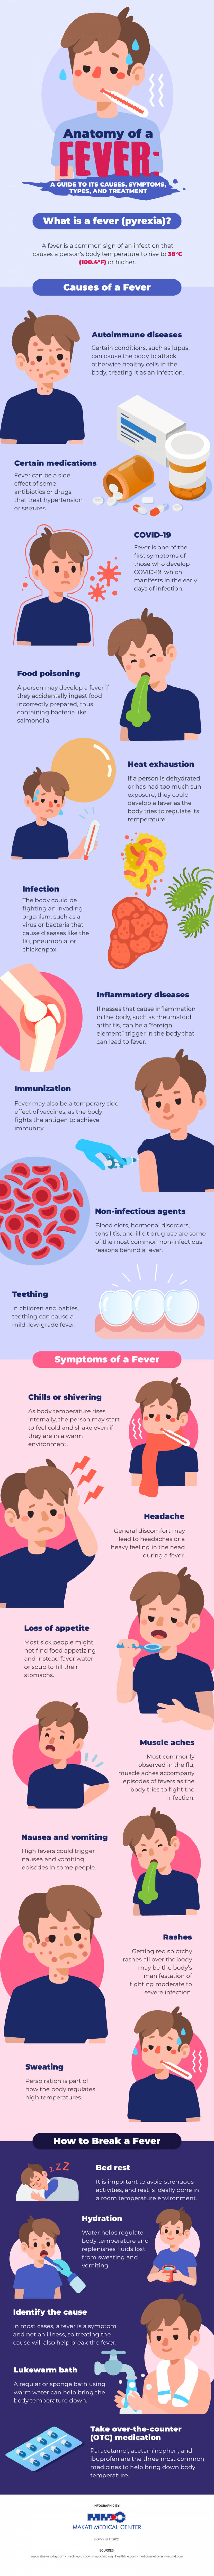 Anatomy of a Fever: Its Causes, Symptoms, & Treatment